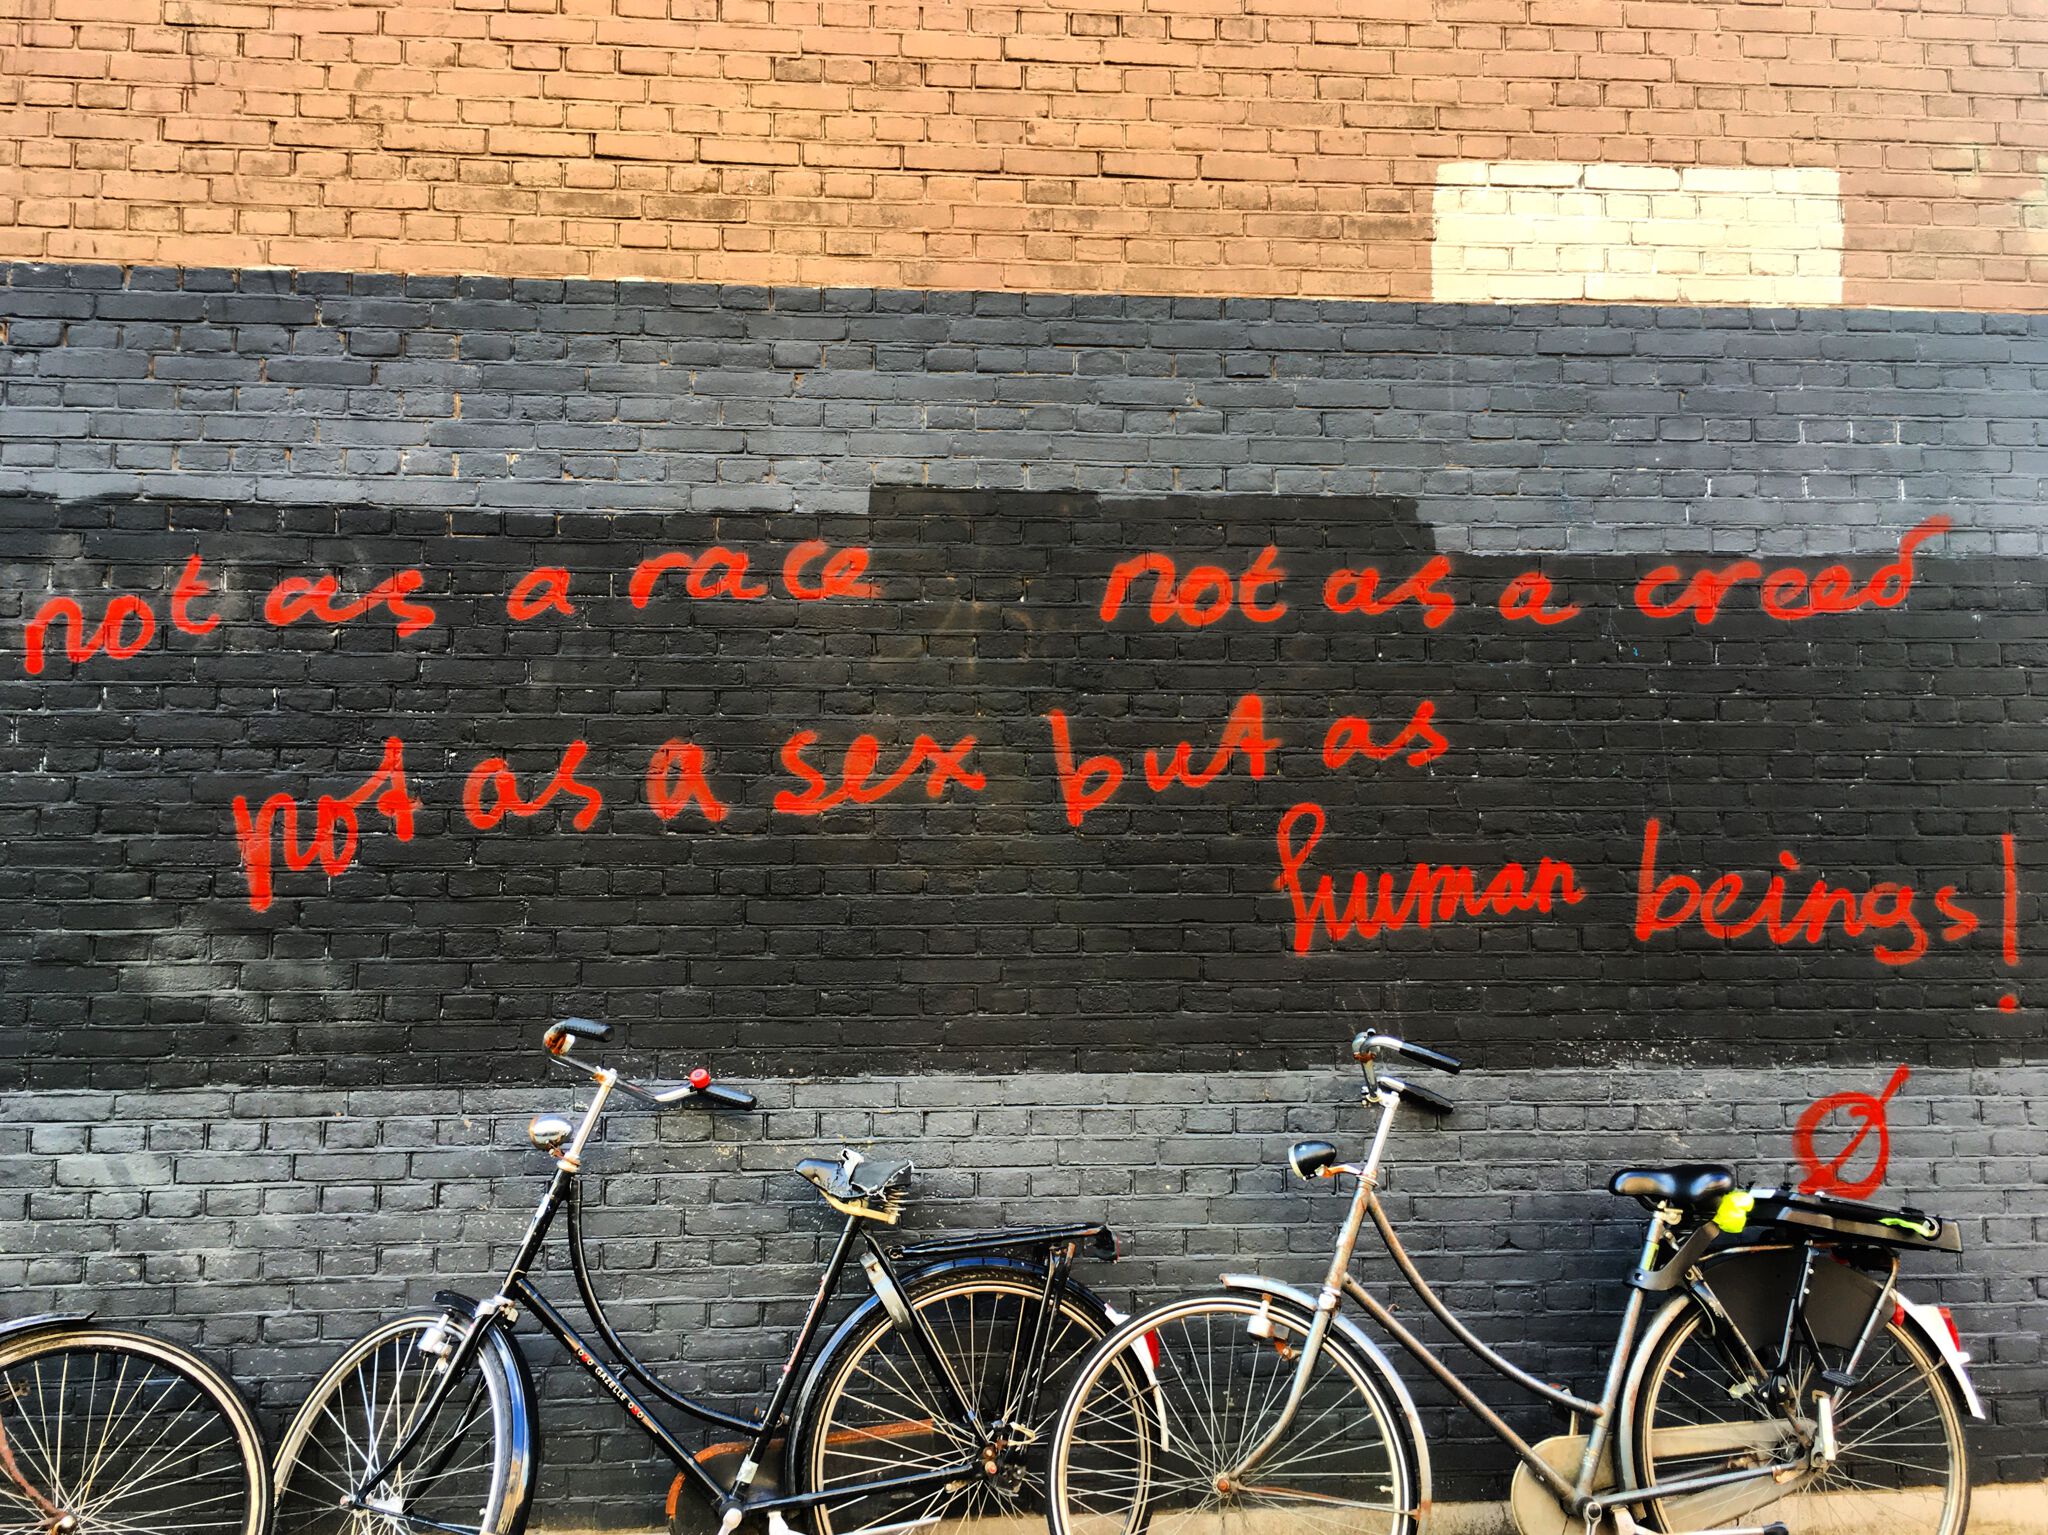 unknown artist&mdash;not as a race not as a creed not as a sex but as human beings!